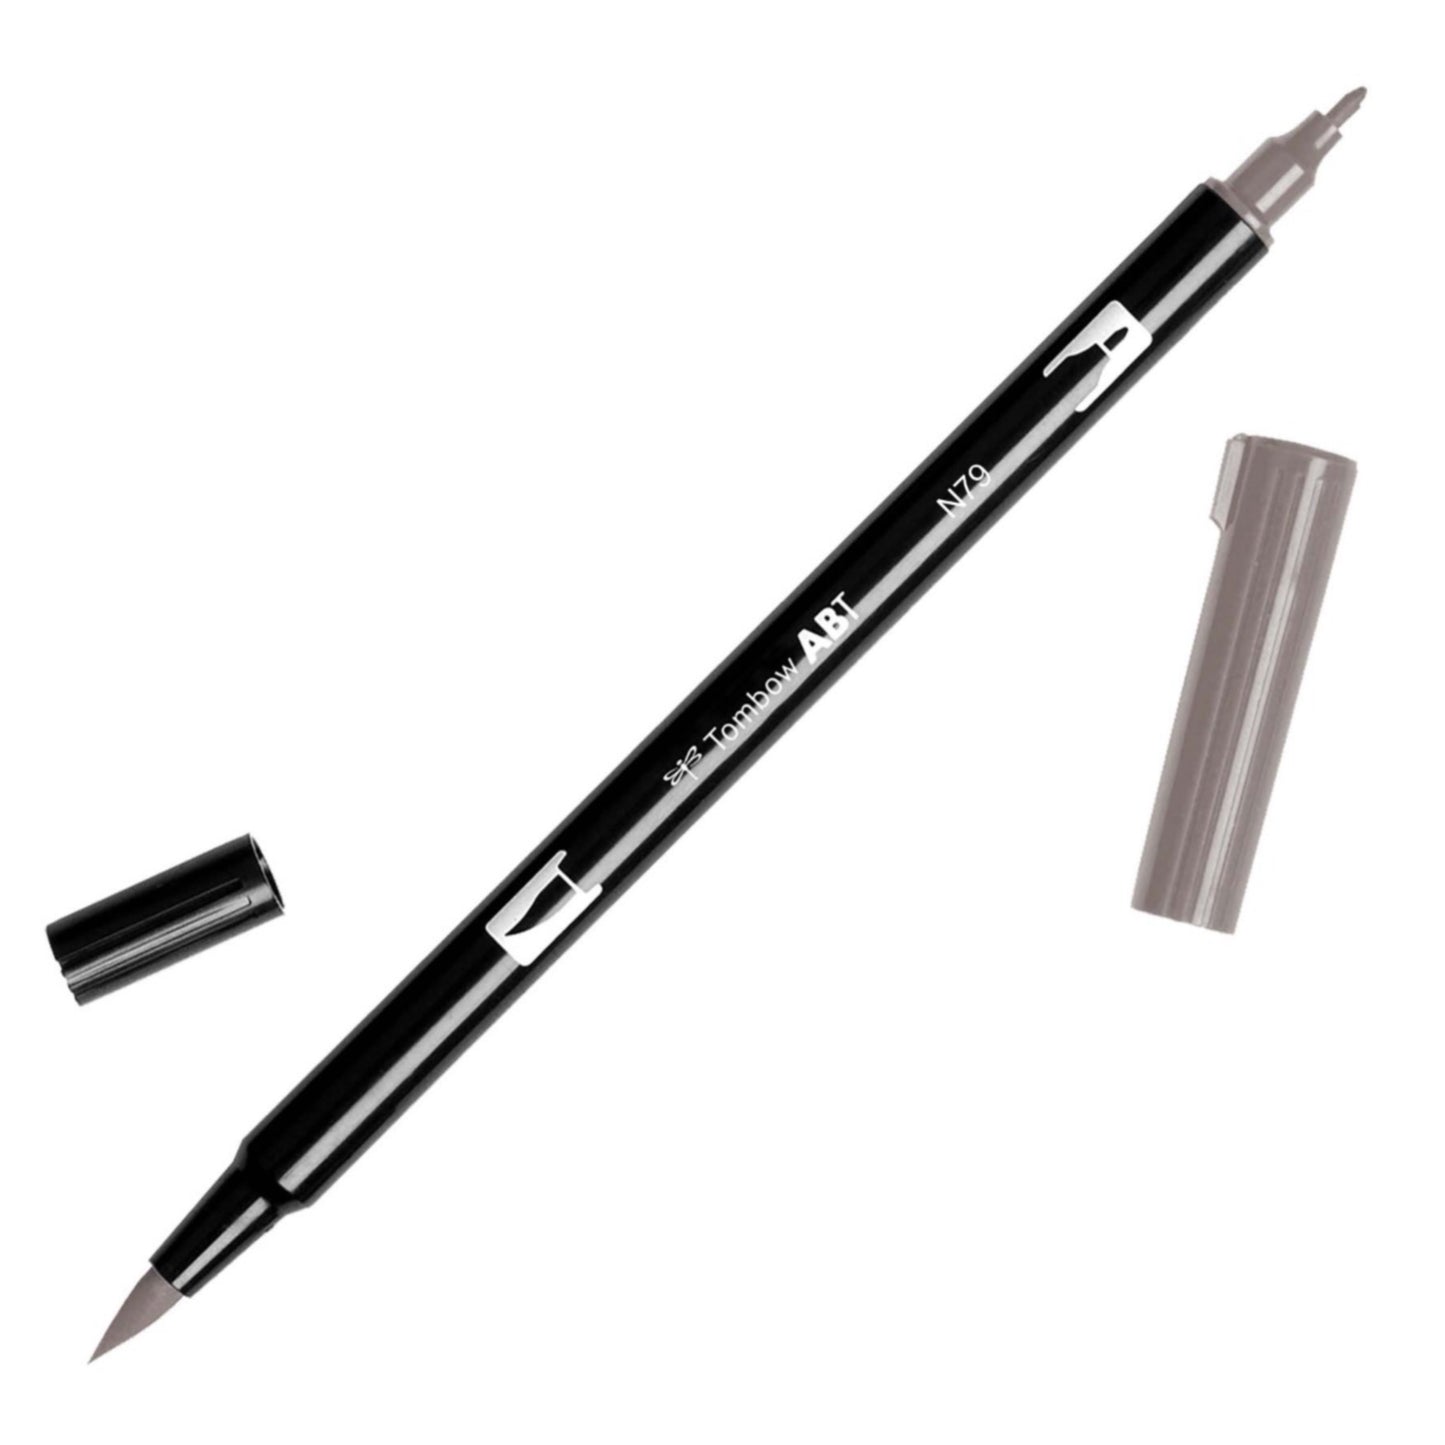 Tombow Dual Brush Pens - Individuals - N79 Warm Gray 2 by Tombow - K. A. Artist Shop